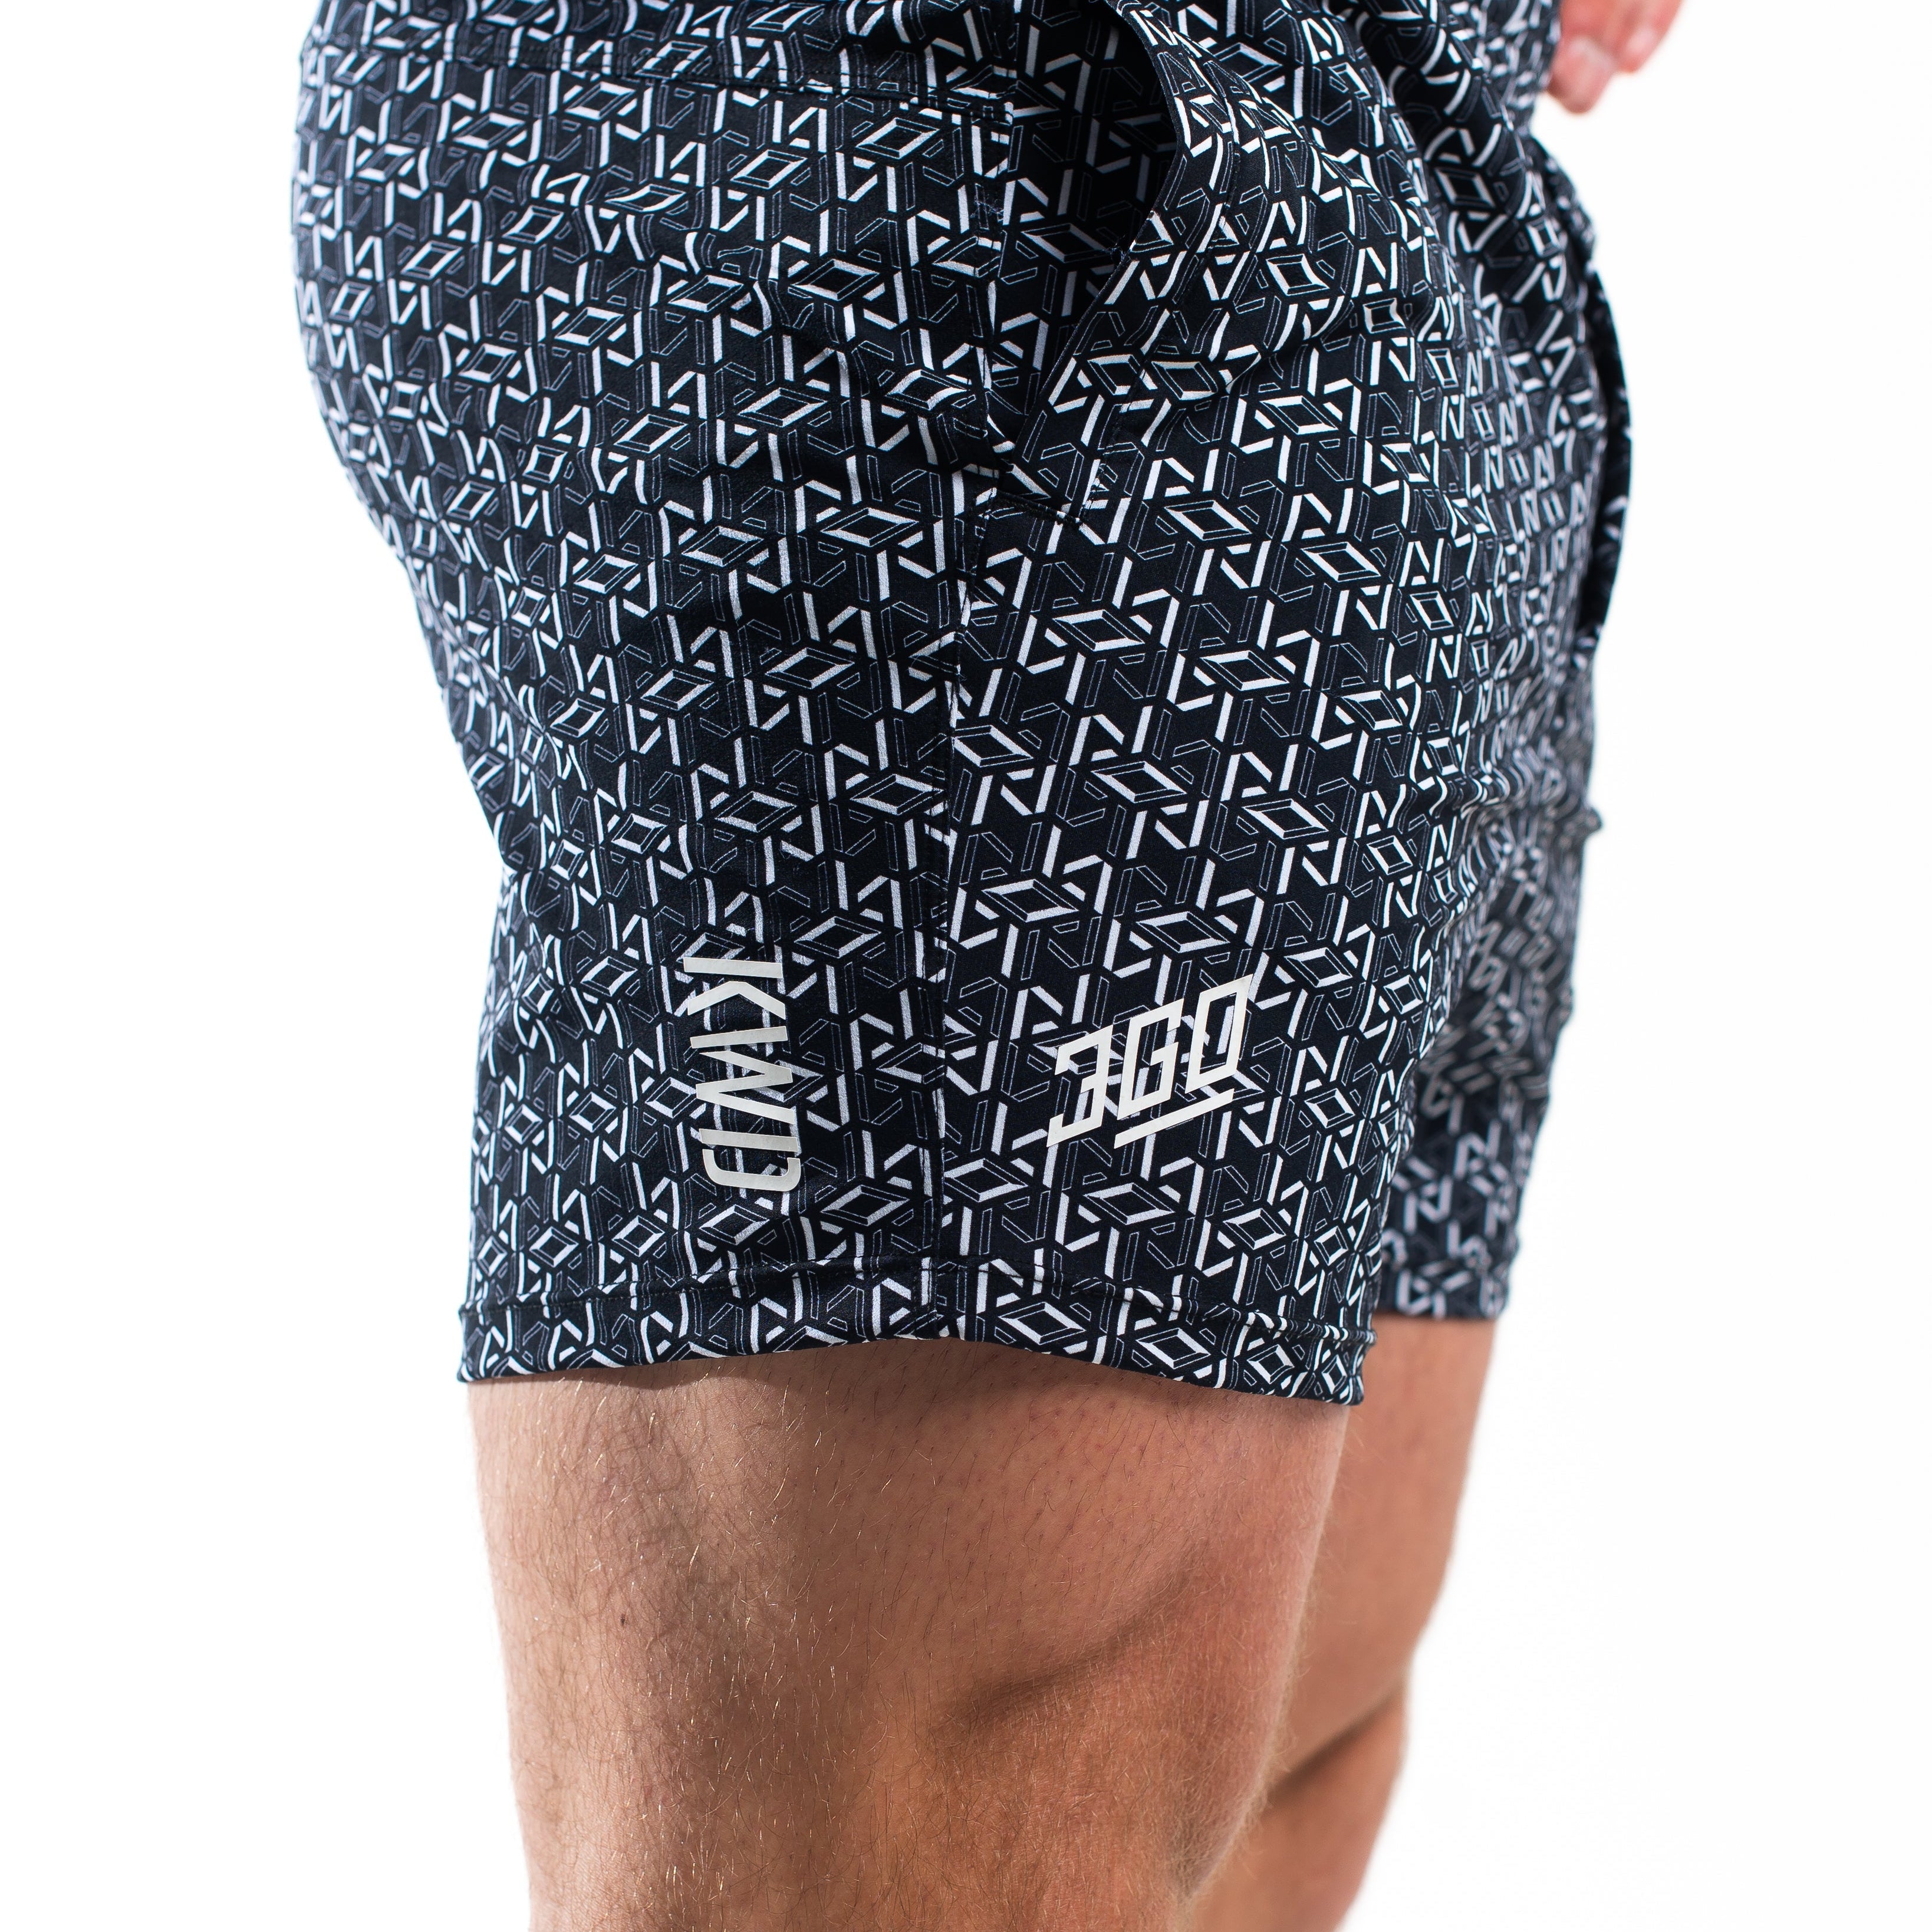 360GO was created to provide the flexibility for all movements in your training while offering comfort. These shorts offer 360 degrees of stretch in all angles and allow you to remain comfortable without limiting any movement in both training and life environments. Designed with a wide drawstring to easily adjust your waist without slipping. Purchase 360GO KWD Squat Shorts from A7 UK. Genouillères powerlifting shipping to France, Spain, Ireland, Germany, Italy, Sweden and EU.